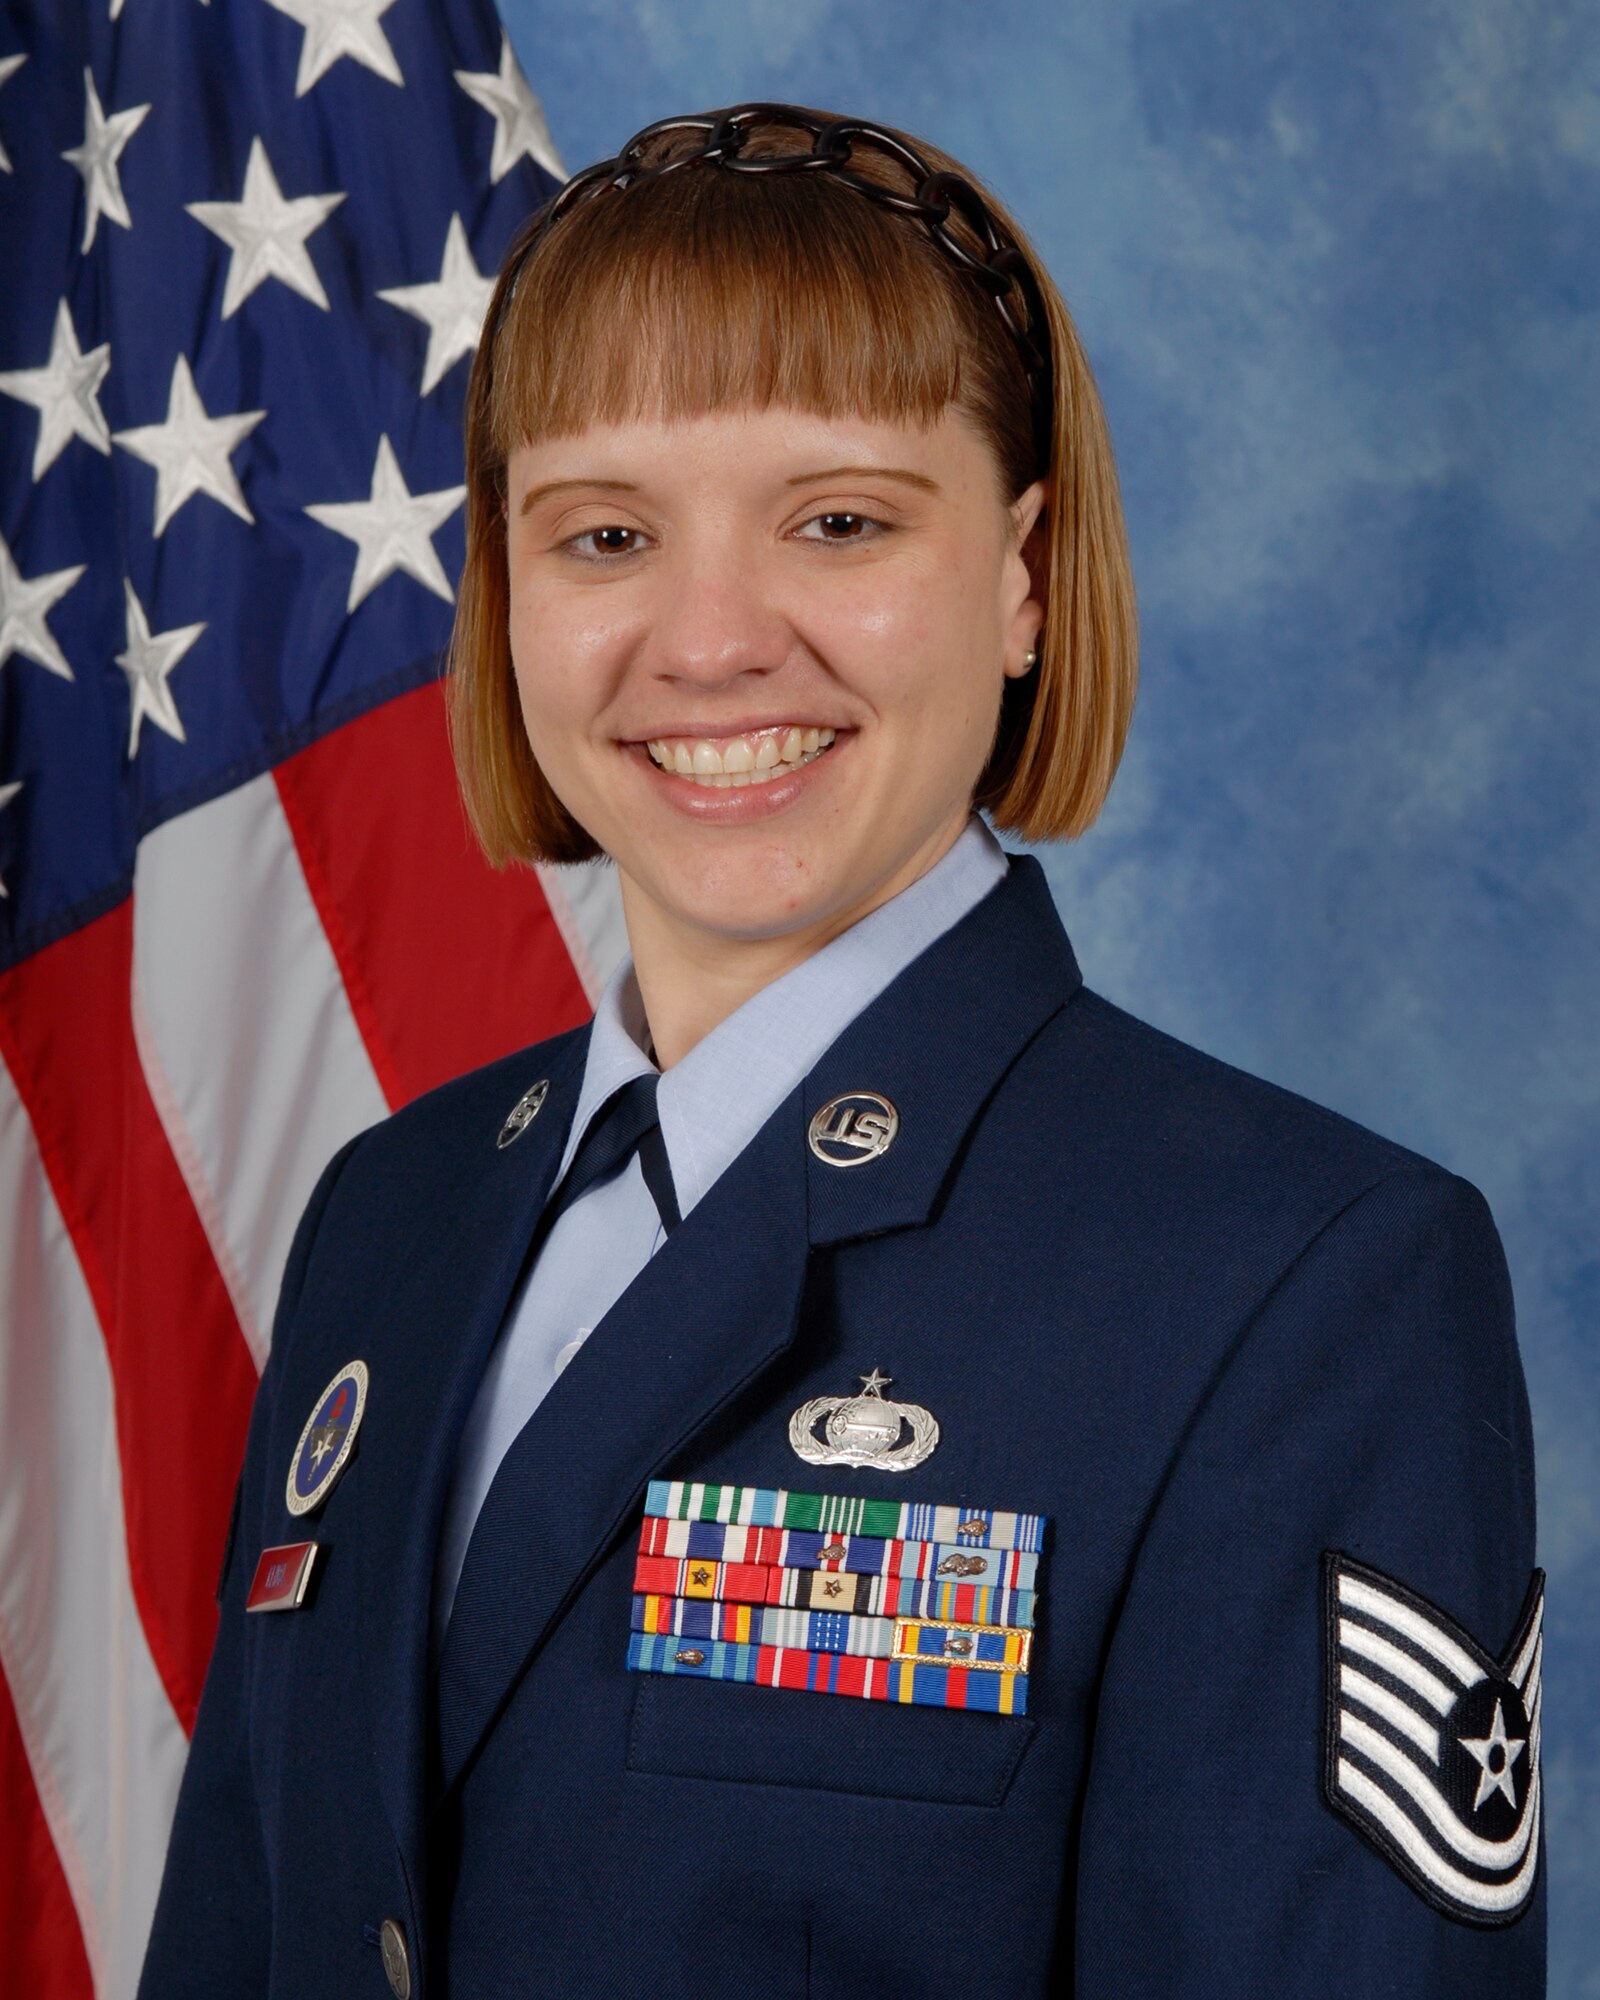 Tech. Sgt. Jennifer Klima, 315th Training Squadron is the 2009 Noncommissioned Officer of the Year for the 17th Training Wing, Goodfellow AFB, Texas. The annual awards program recognizes both civilians and members in 16 categories of the Air Force, Army, Navy and Marines who are assigned to the wing, for their significant contributions to the 17 TRW, the community and mission. (U.S. Air Force photo/ Lou Czarnecki) 